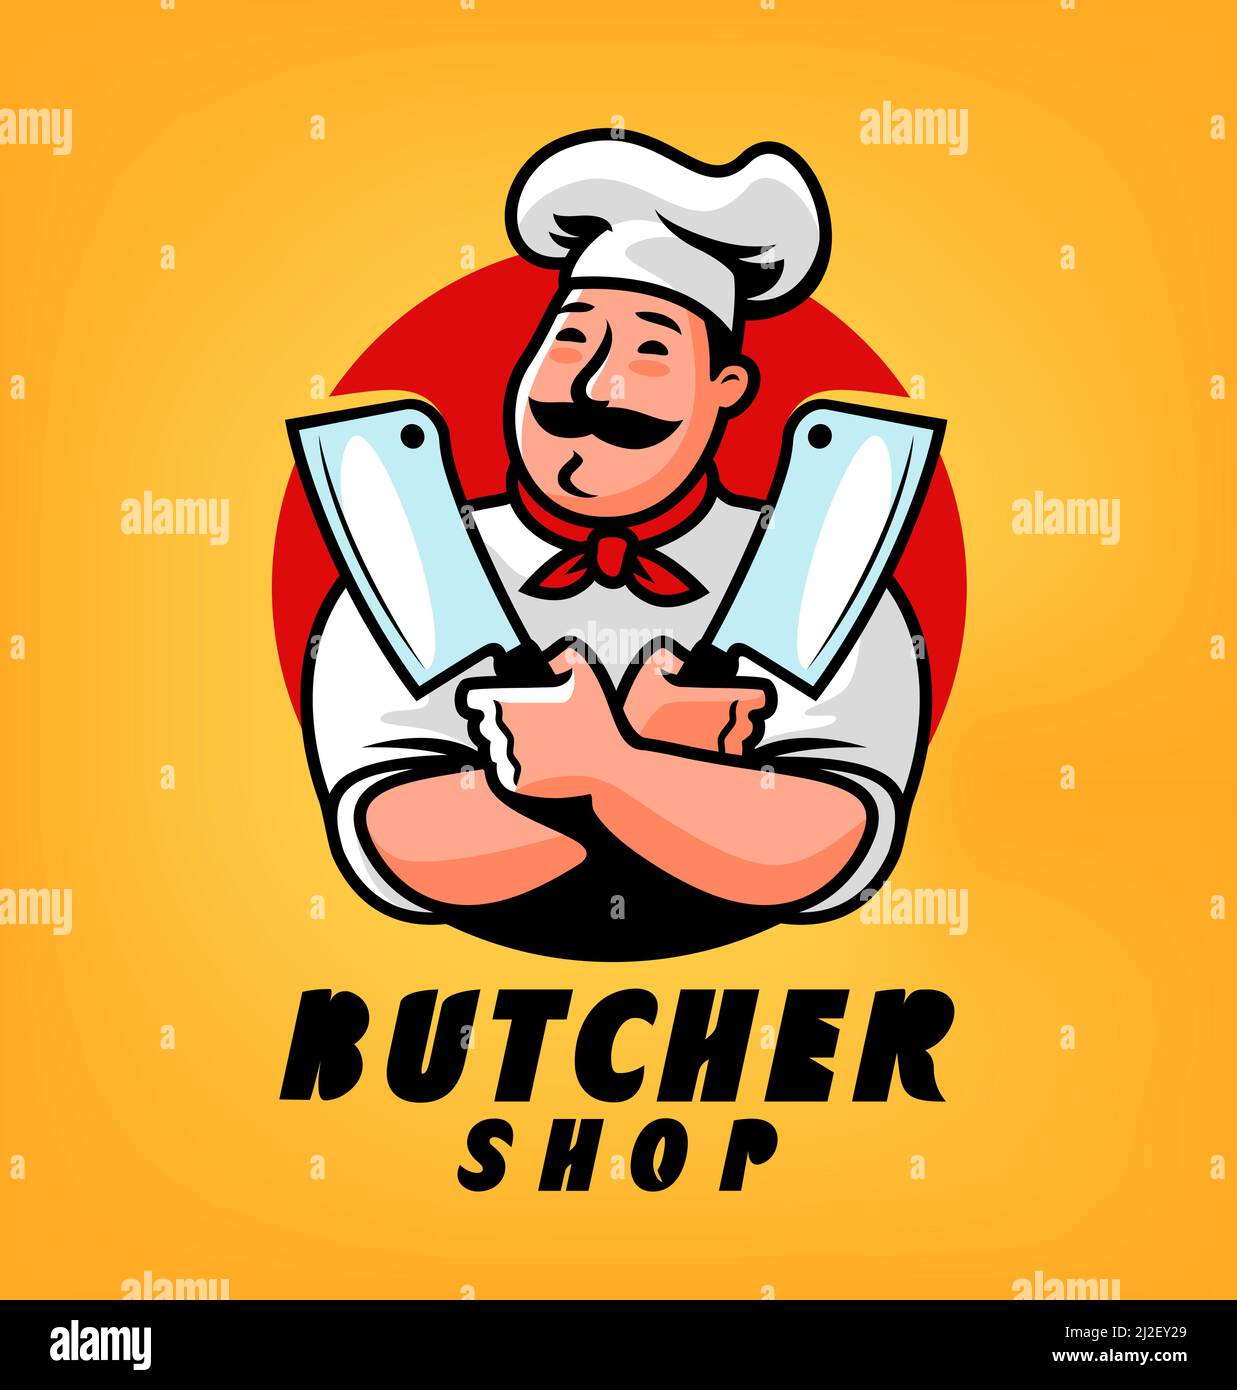 Butcher shop logo. Emblem chef with meat knife for farmers market. Cartoon character vector illustration Stock Vector